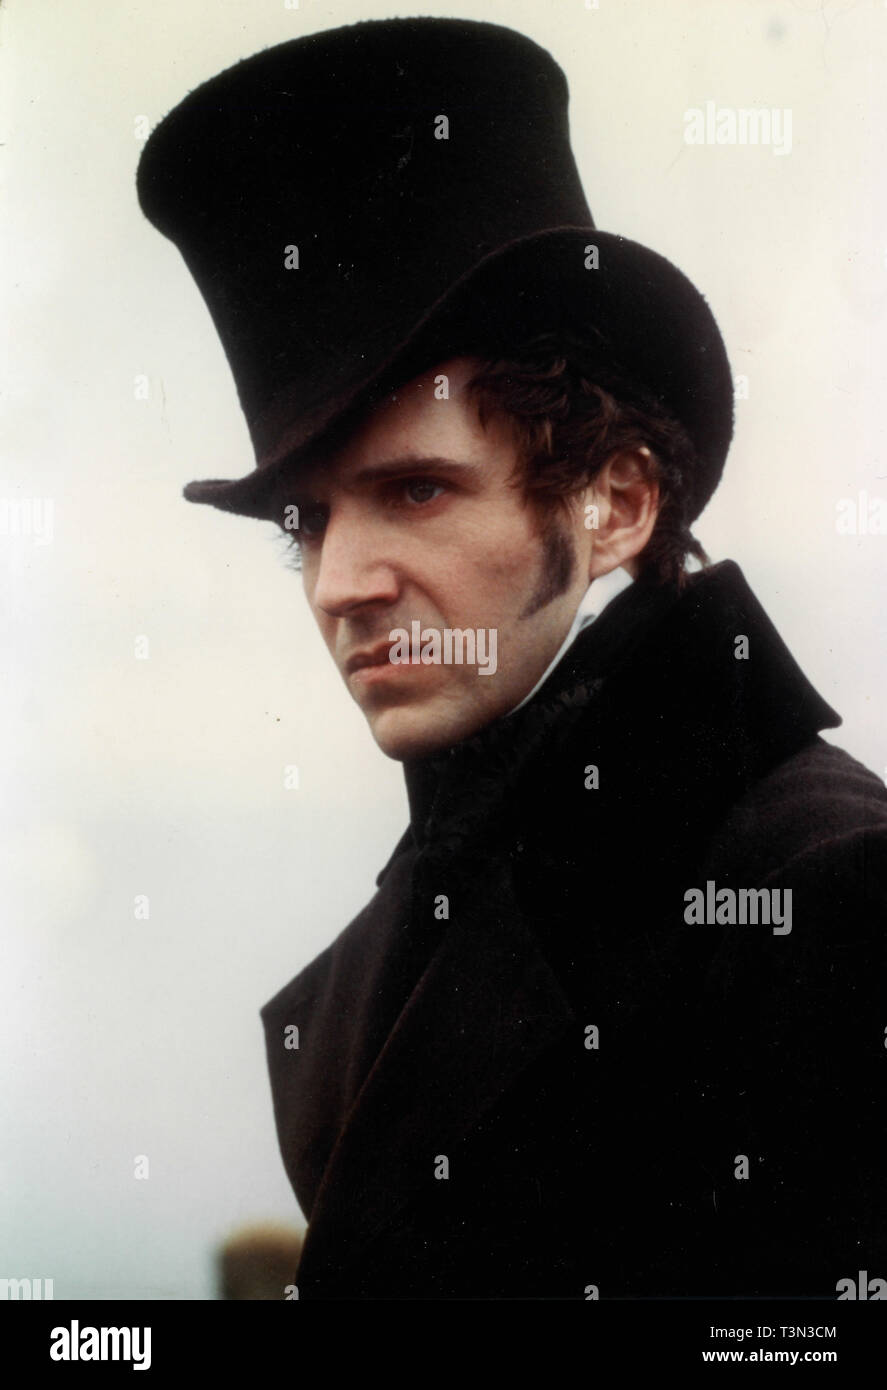 Actor Ralph Fiennes in the movie Onegin, 1999 Stock Photo